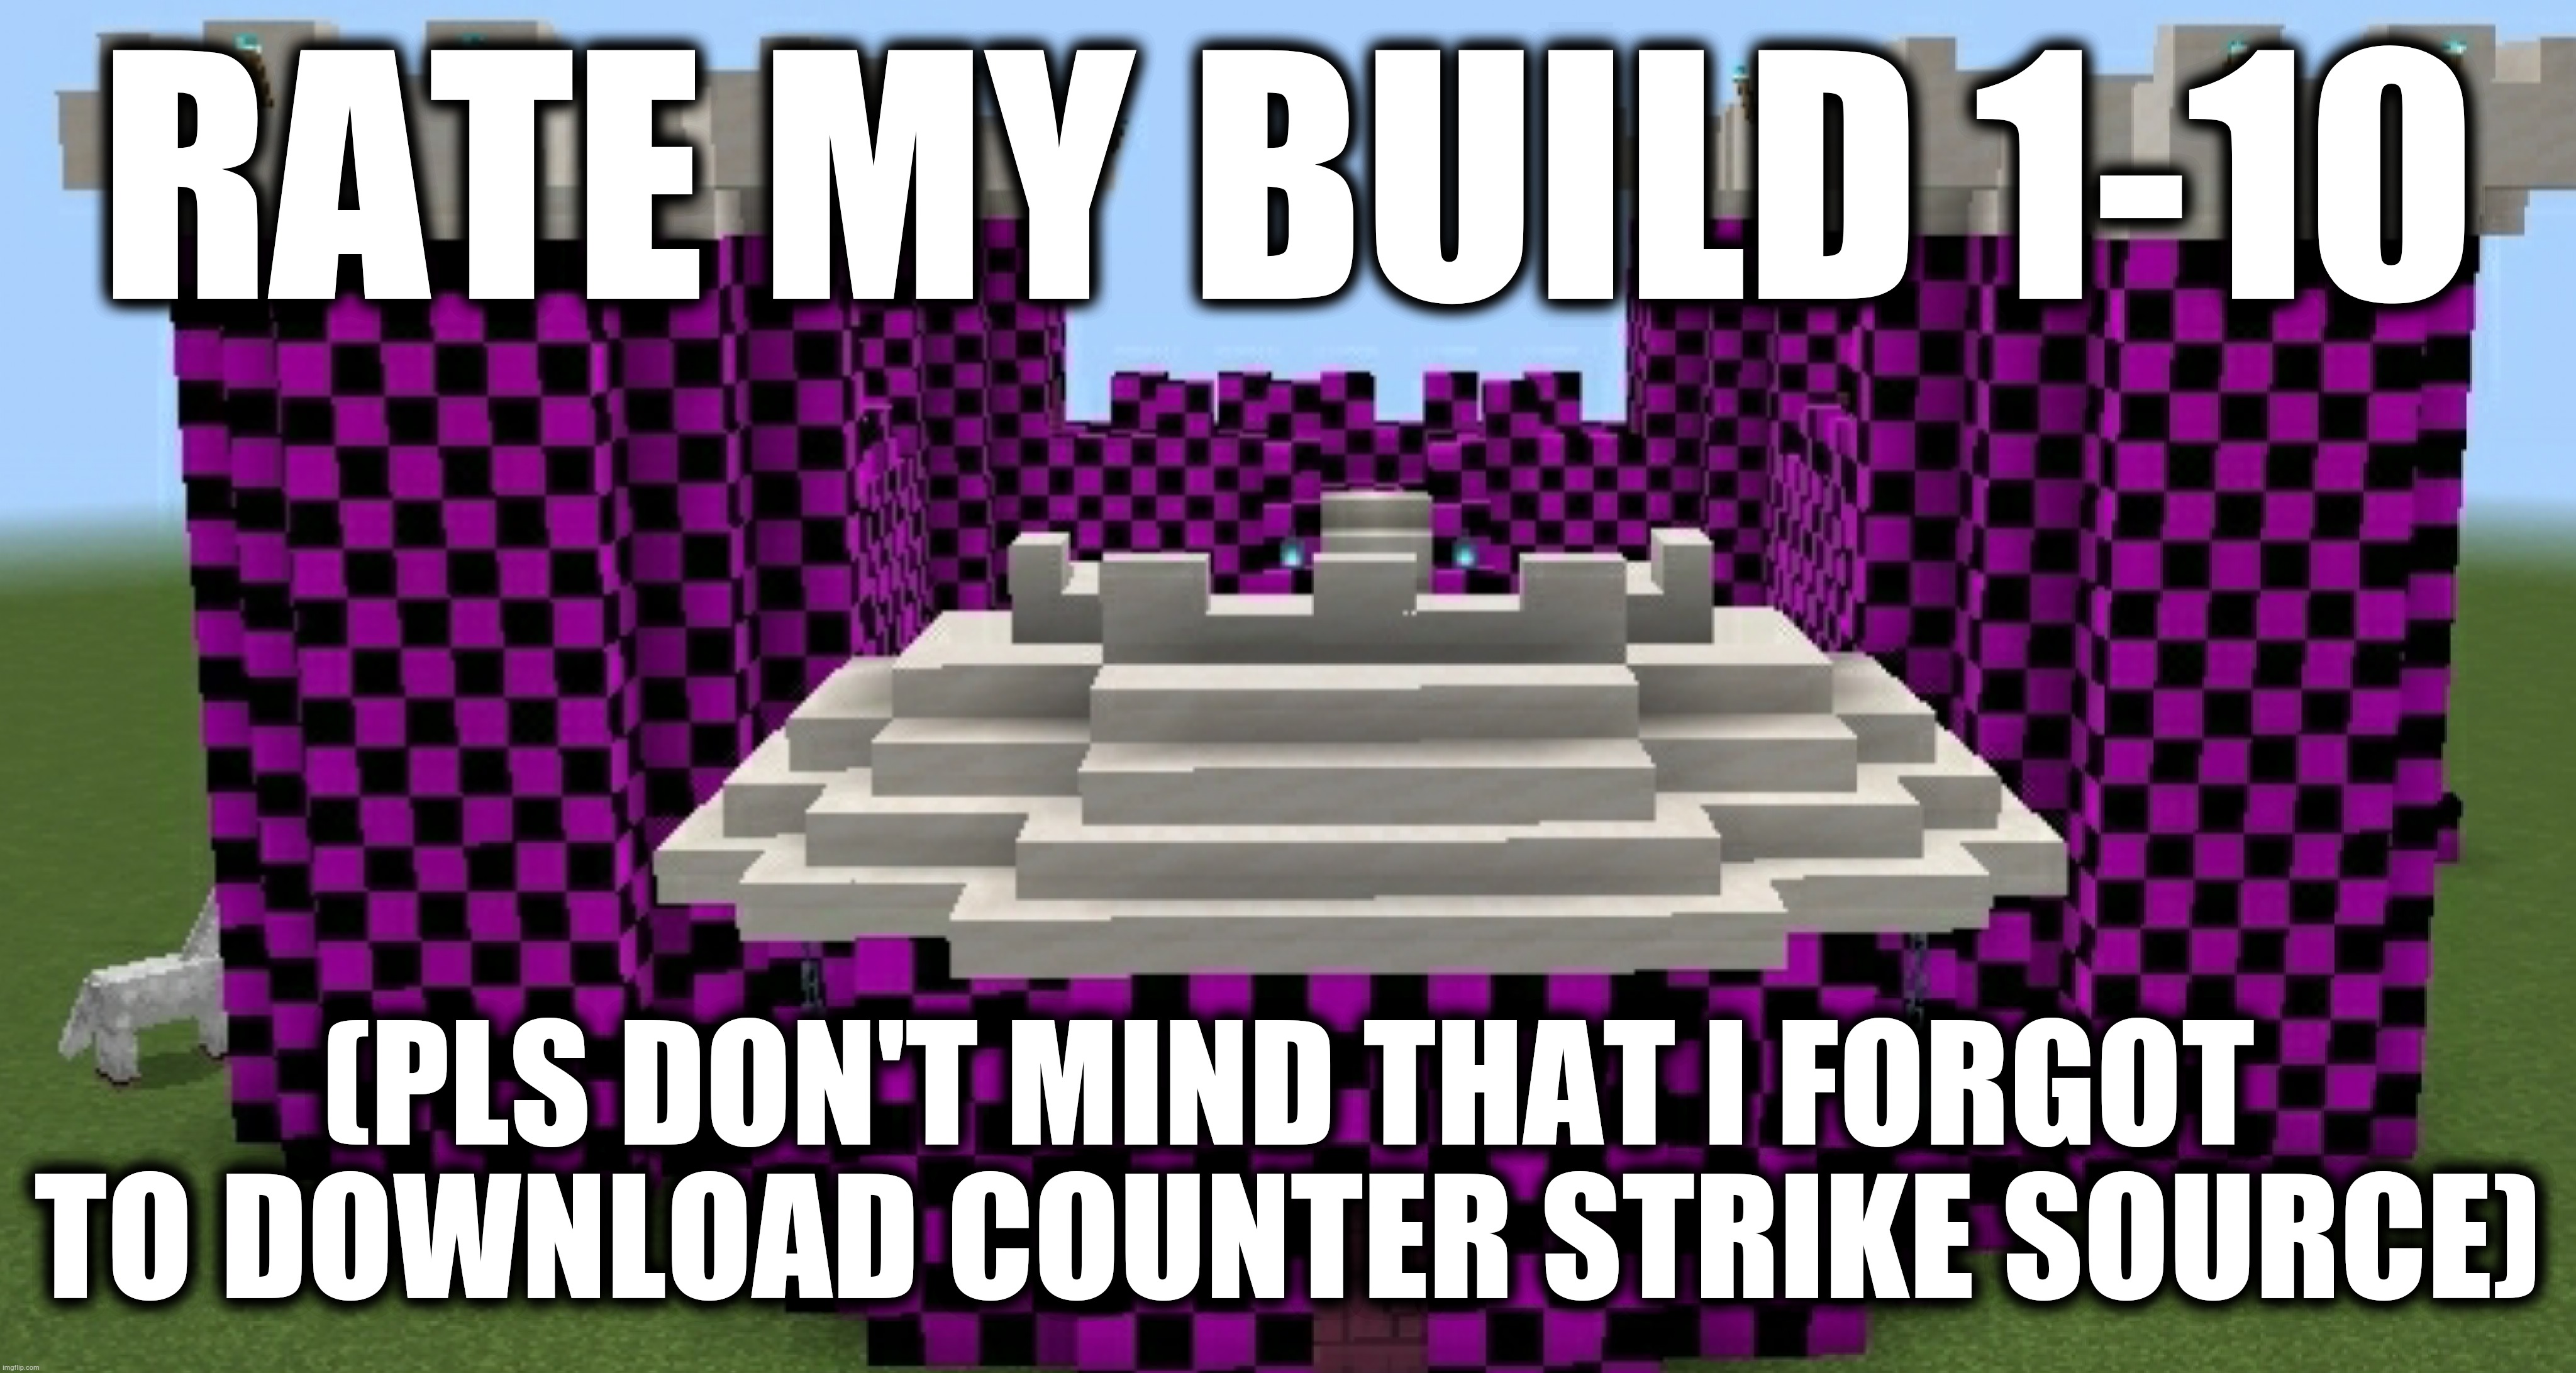 RATE MY BUILD 1-10; (PLS DON'T MIND THAT I FORGOT TO DOWNLOAD COUNTER STRIKE SOURCE) | made w/ Imgflip meme maker